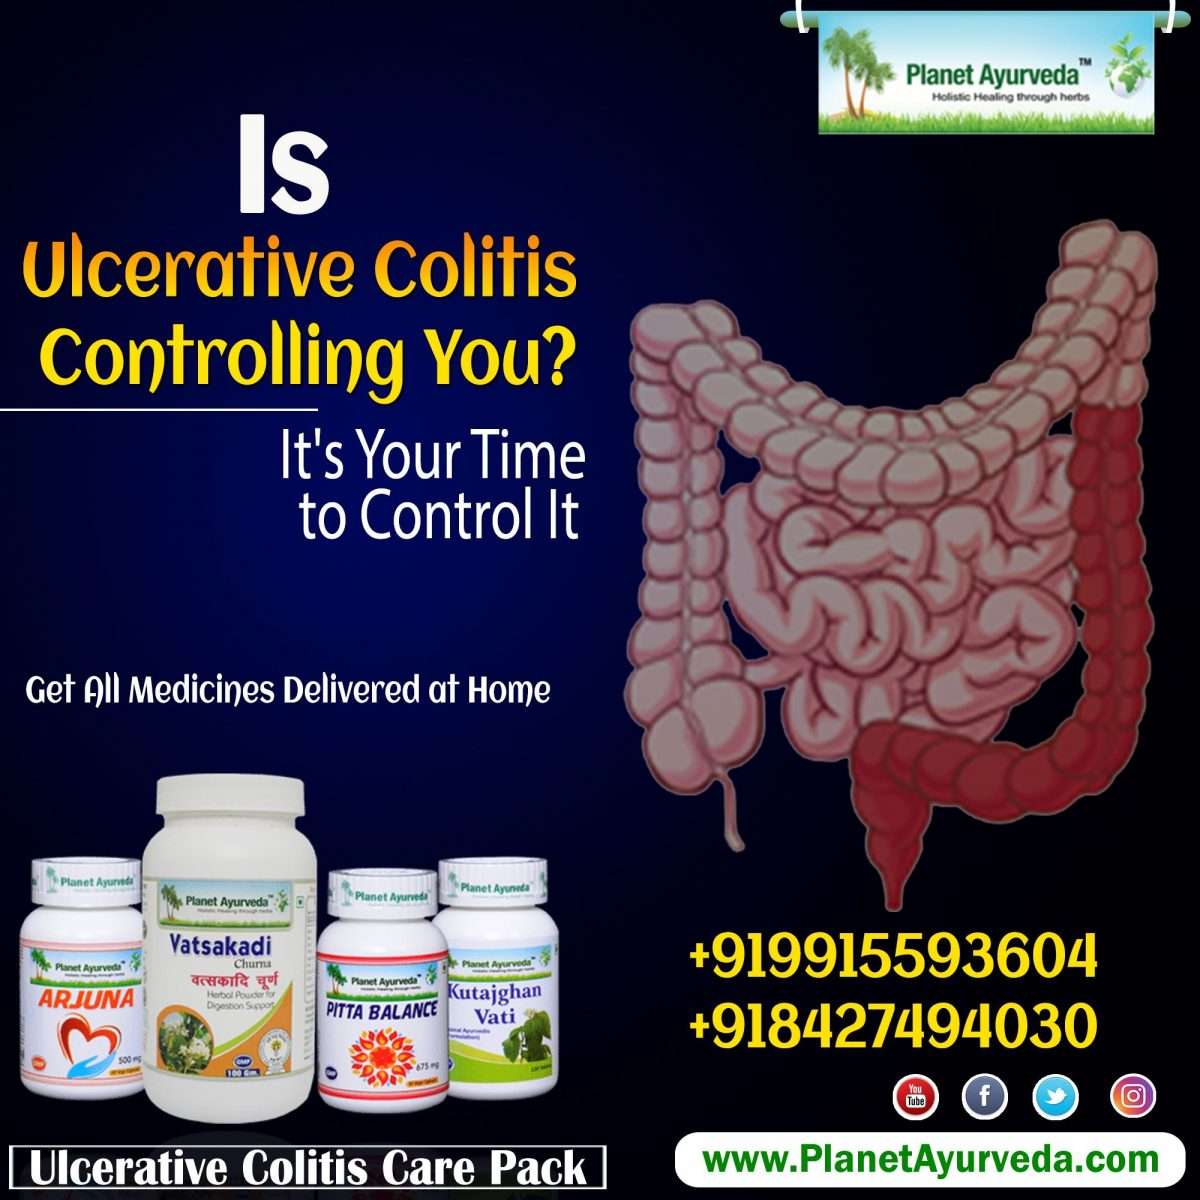 Ulcerative Colitis is an inflammatory disorde